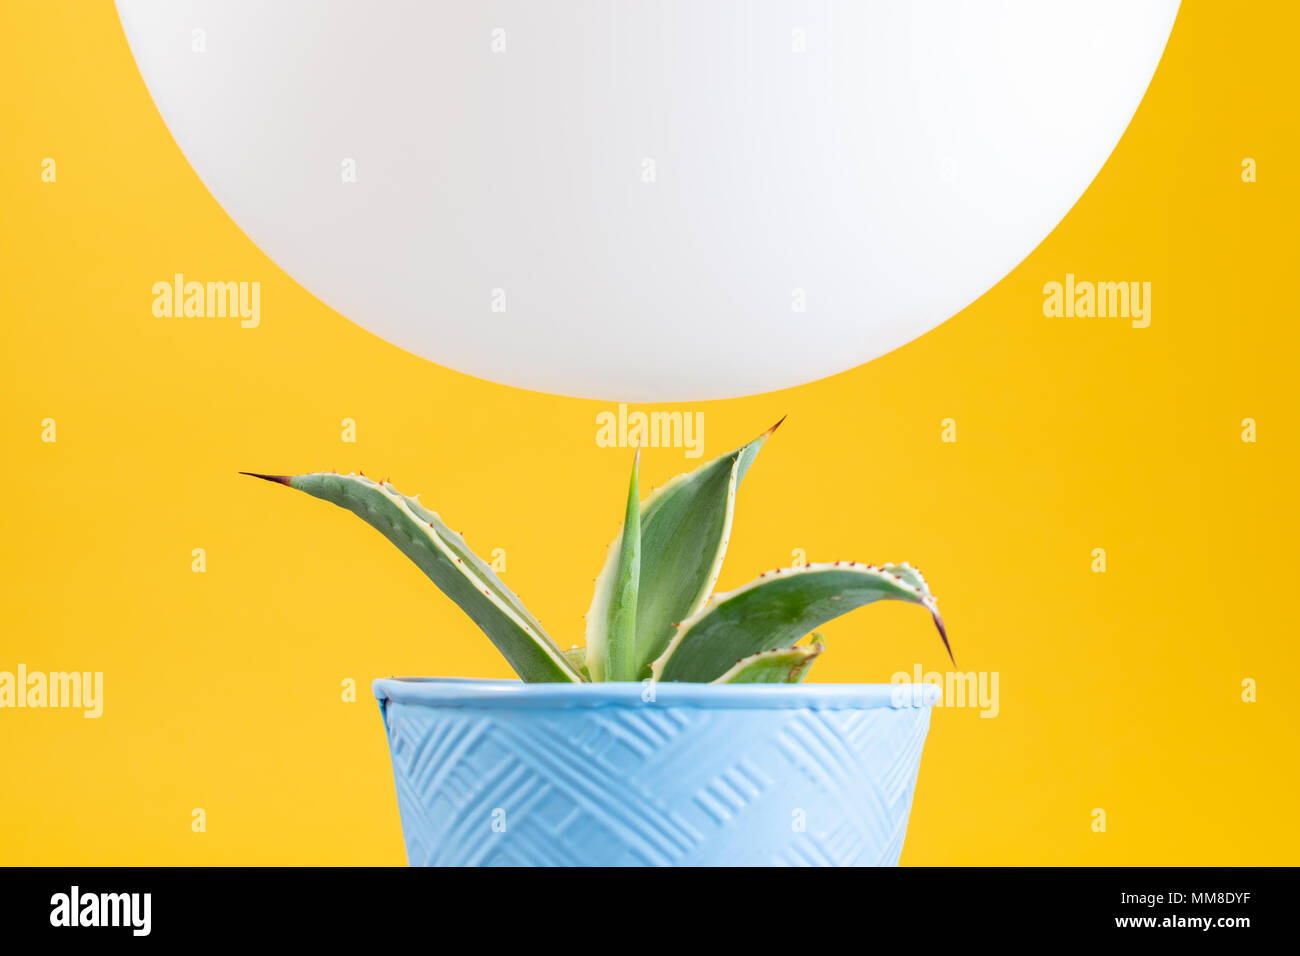 White balloon balancing precariously above a sharp point cactus with a bright yellow background Stock Photo